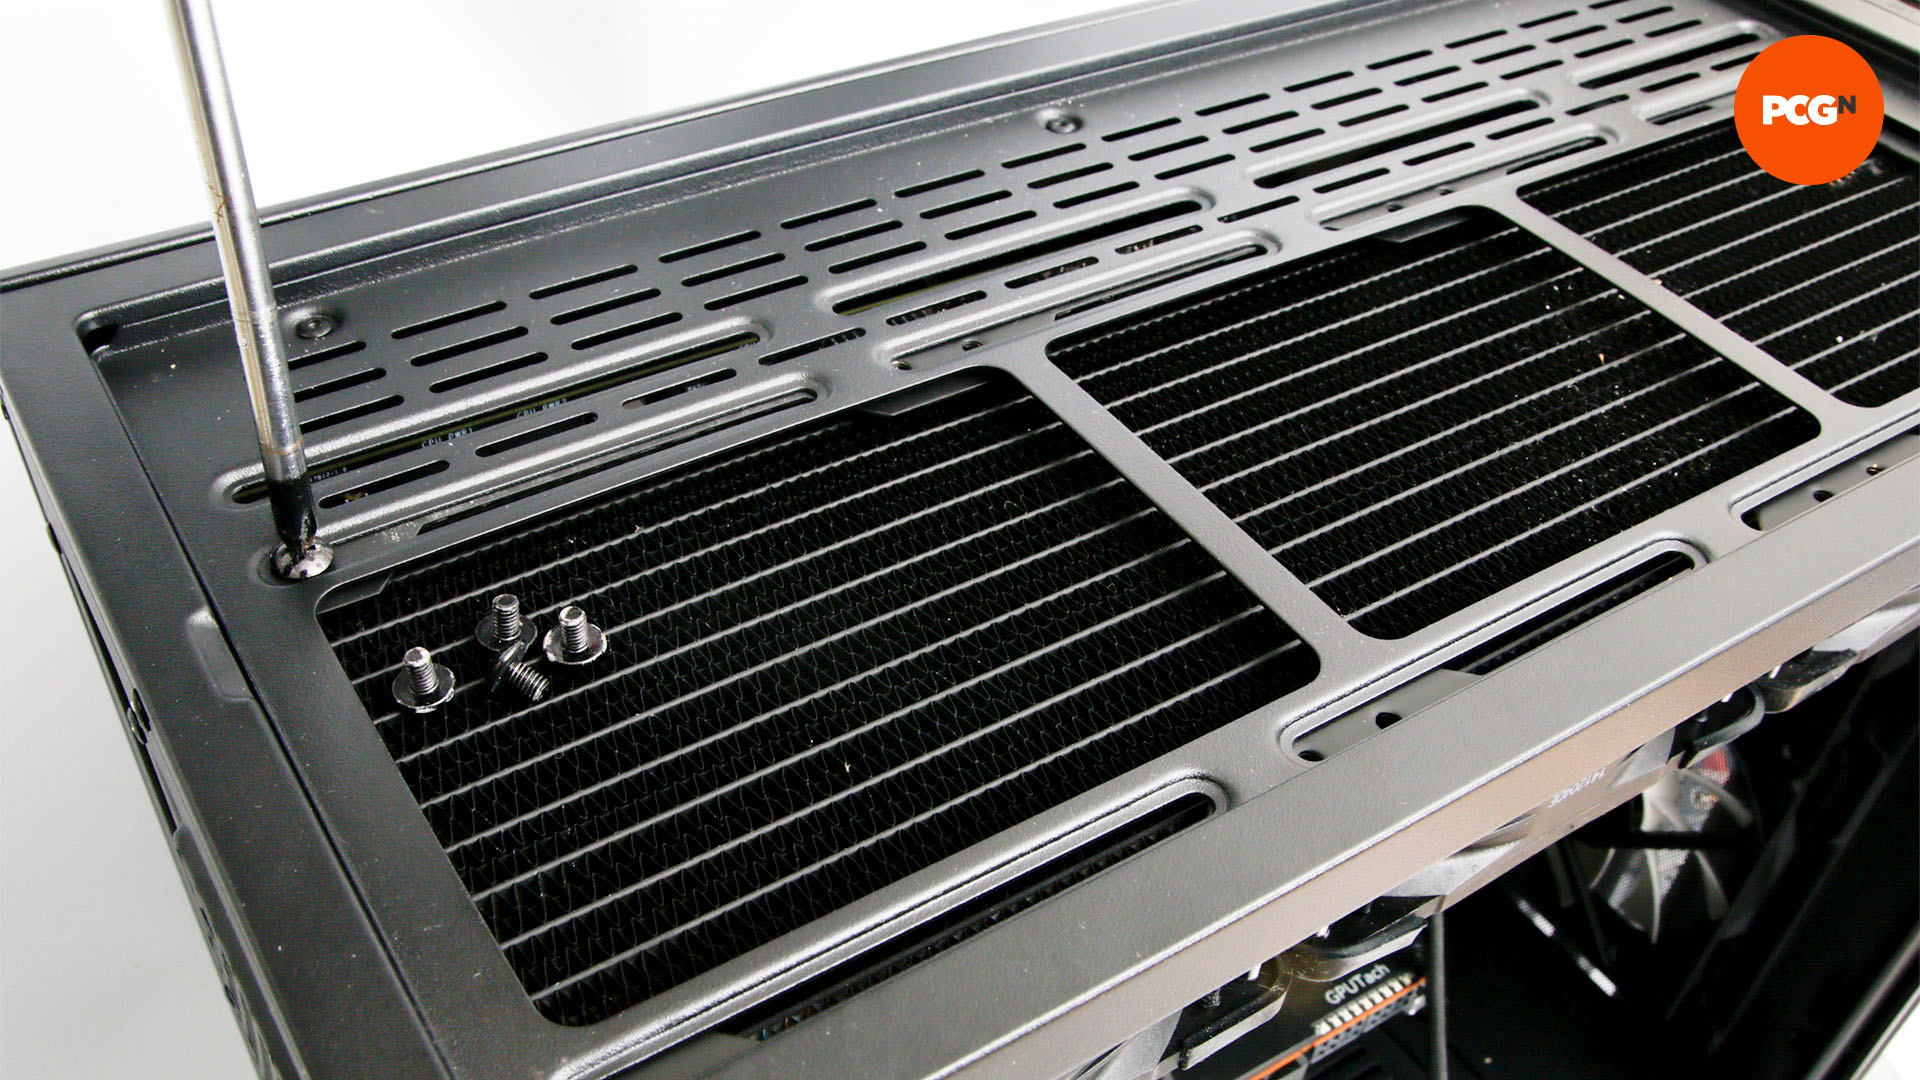 How to water cool your PC: Fit radiator to your PC case